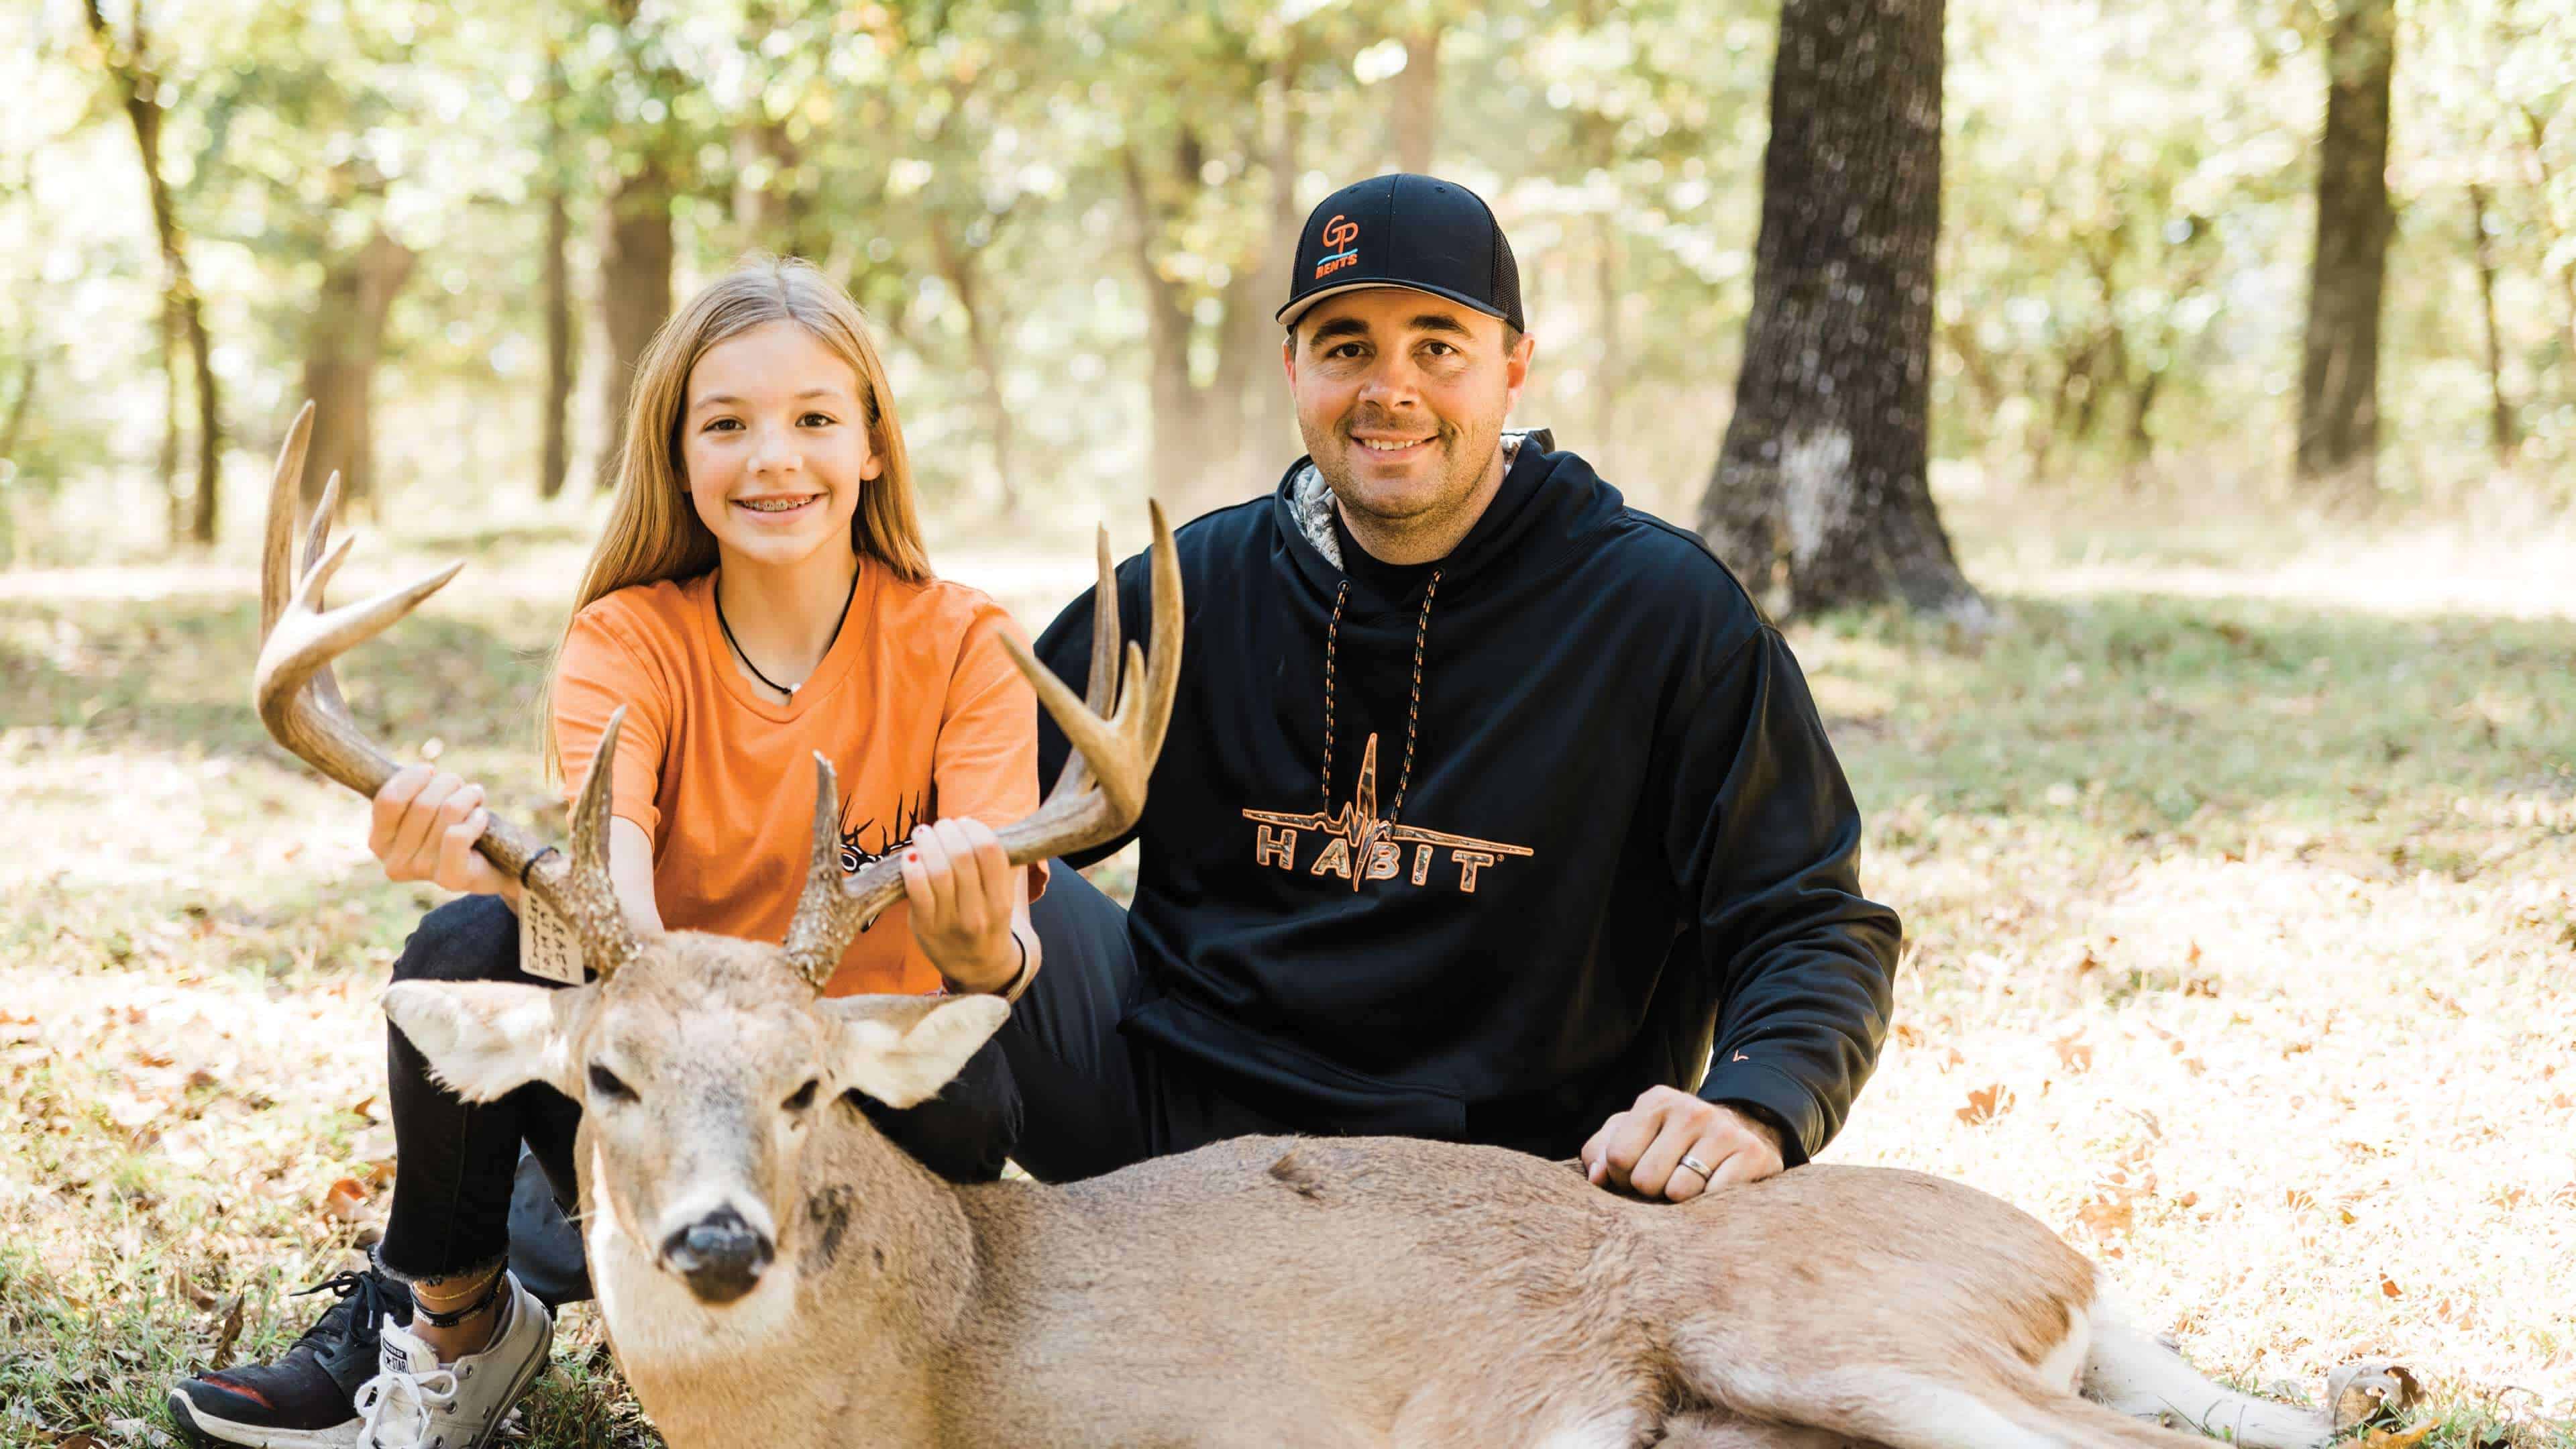 Daniel Arms and daughter holding harvested deer